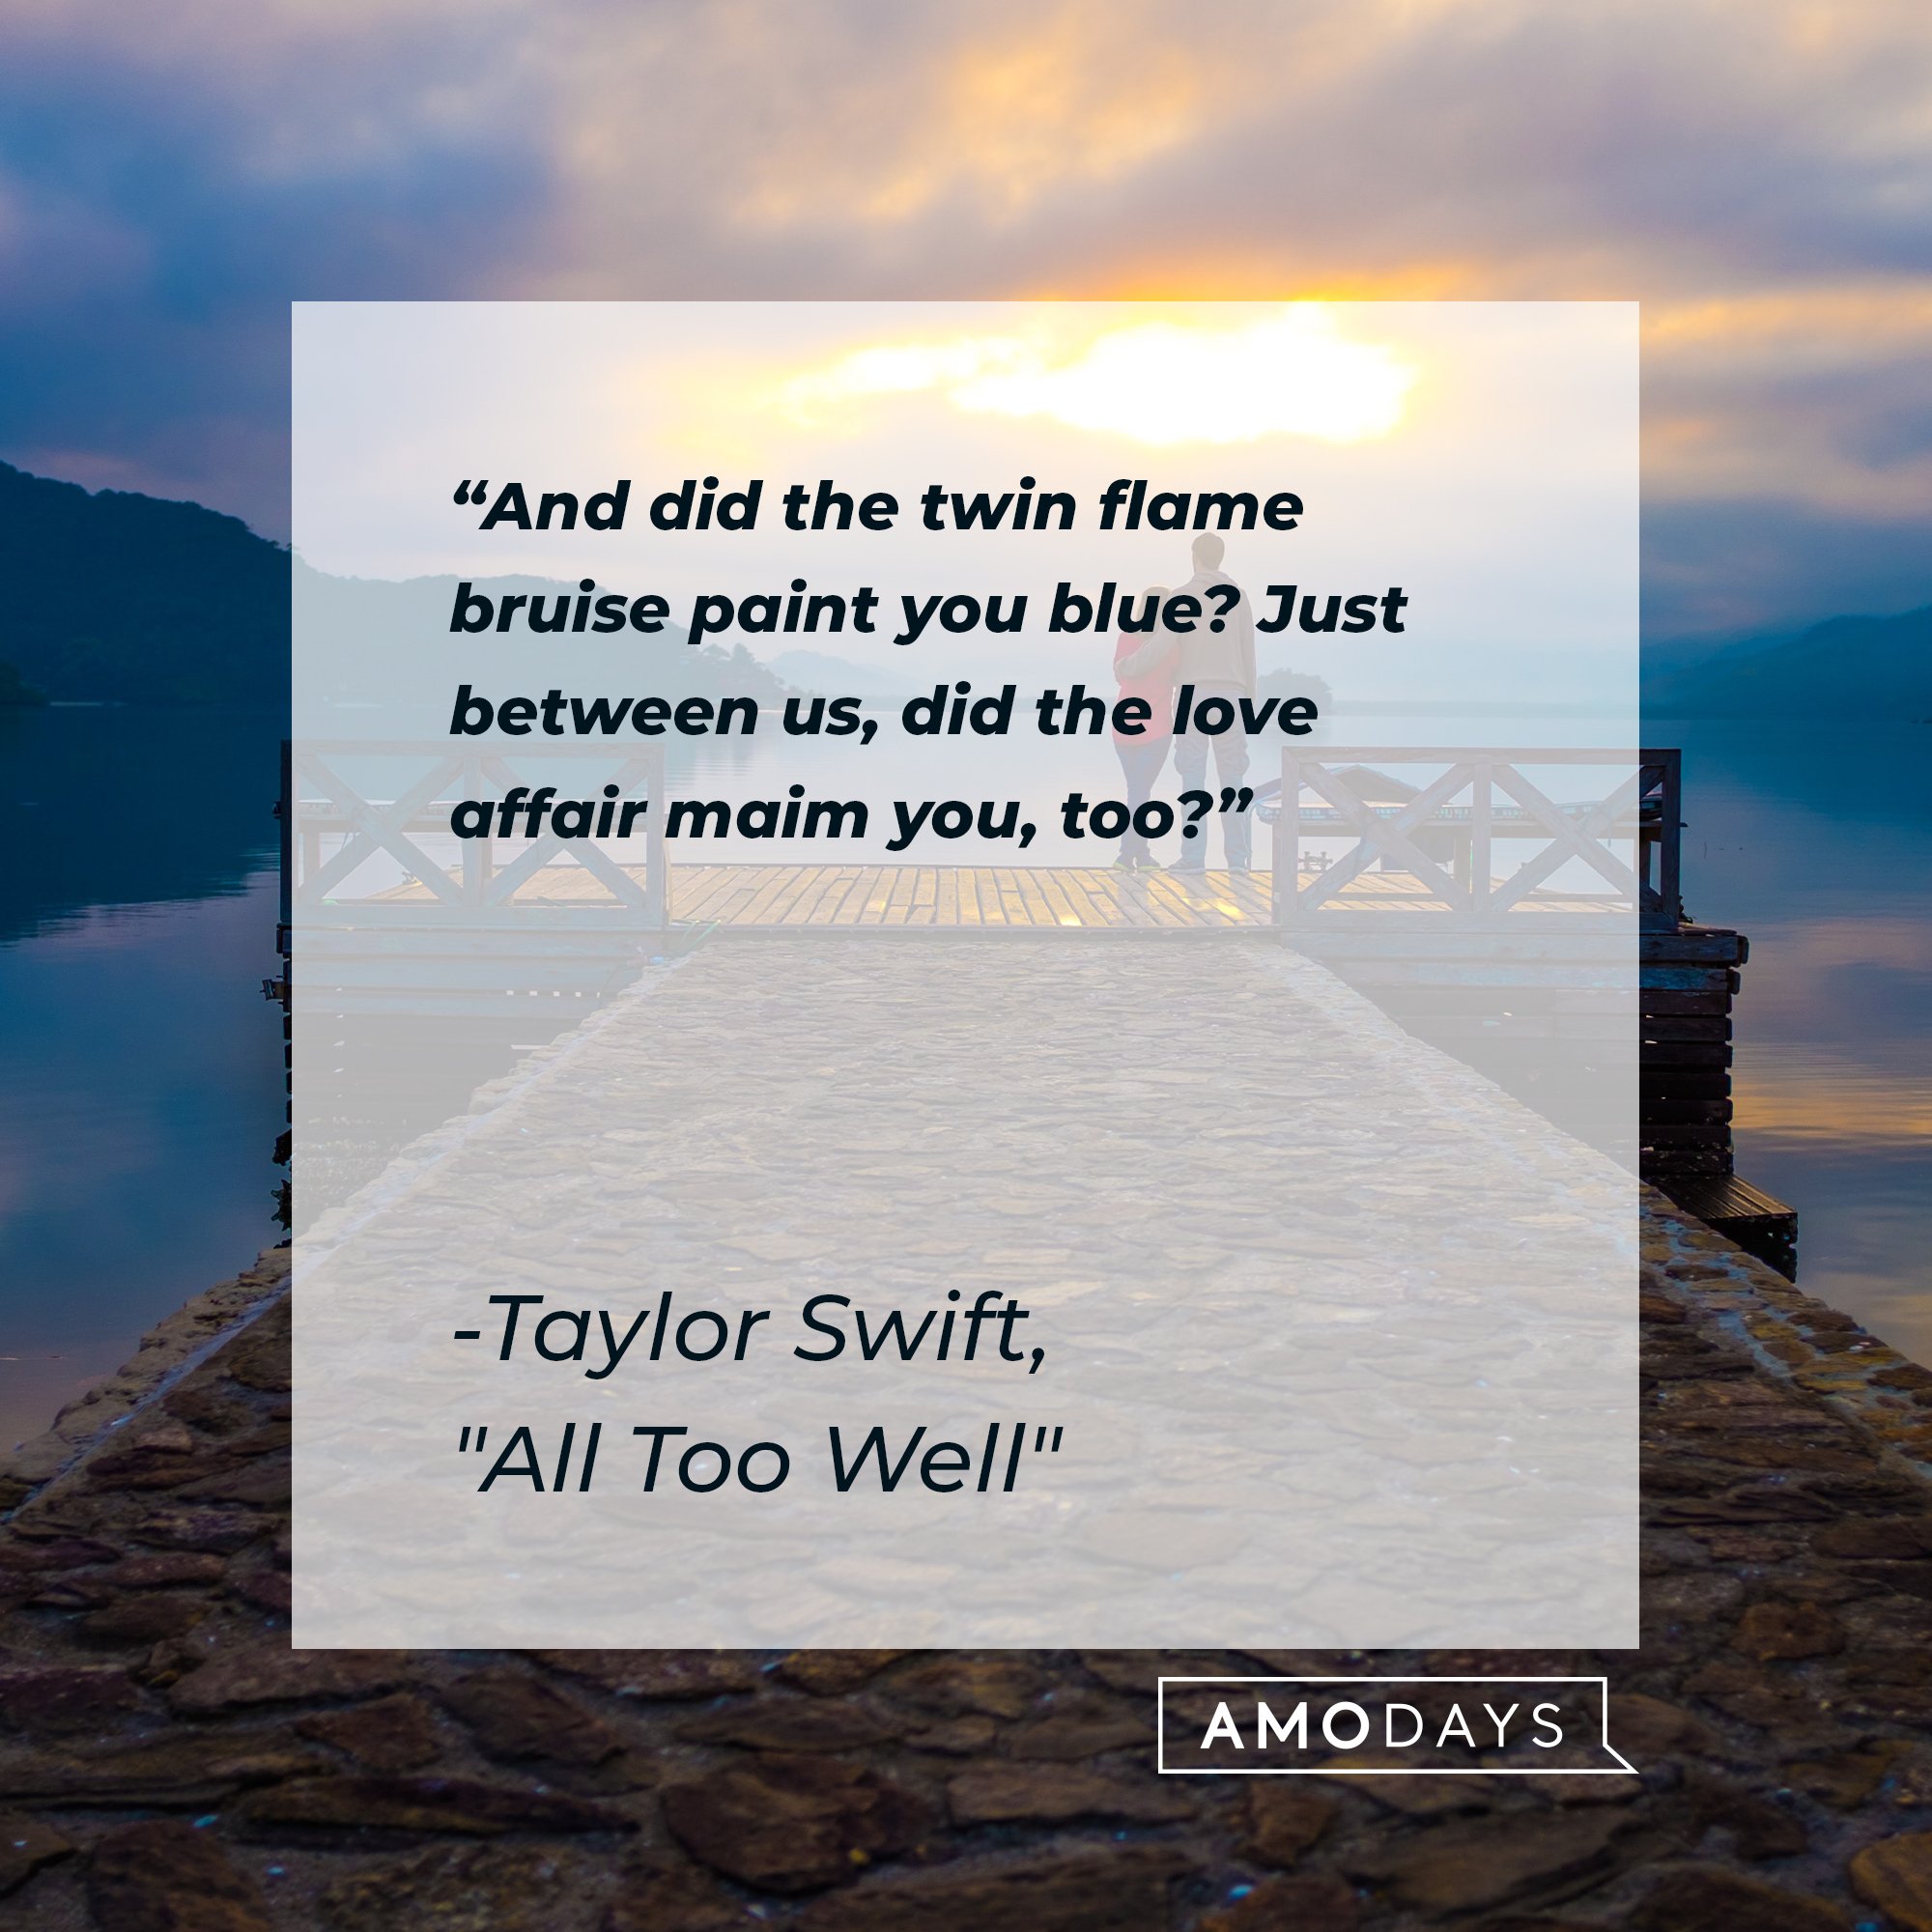 Taylor Swift’s lyric from her song "All Too Well”: "And did the twin flame bruise paint you blue? Just between us, did the love affair maim you, too?" | Image: AmoDays 